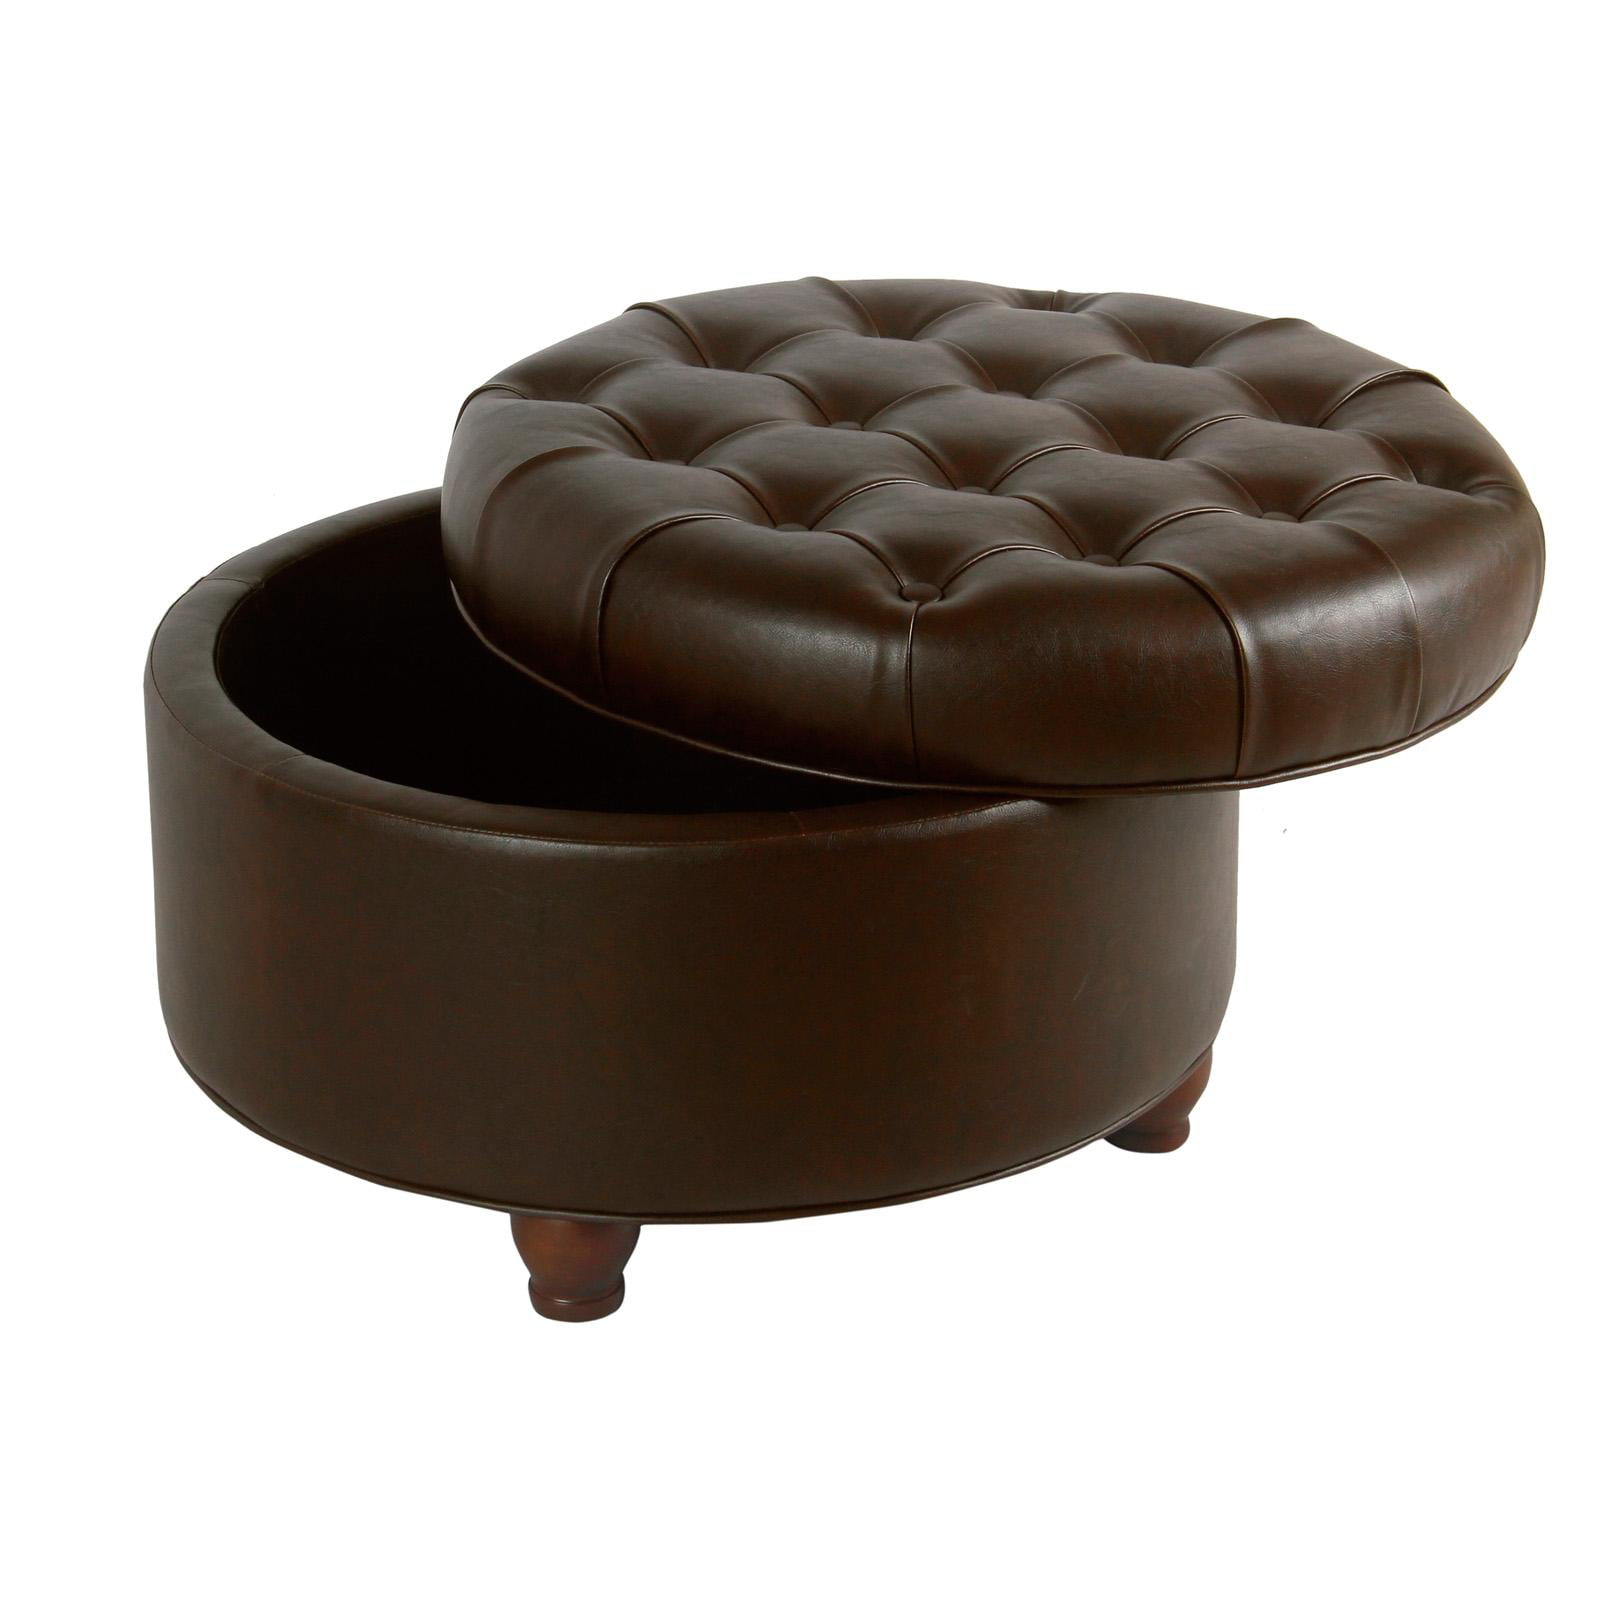 Cocoa/ brown Fabric Footstool storage box/ottoman Large 